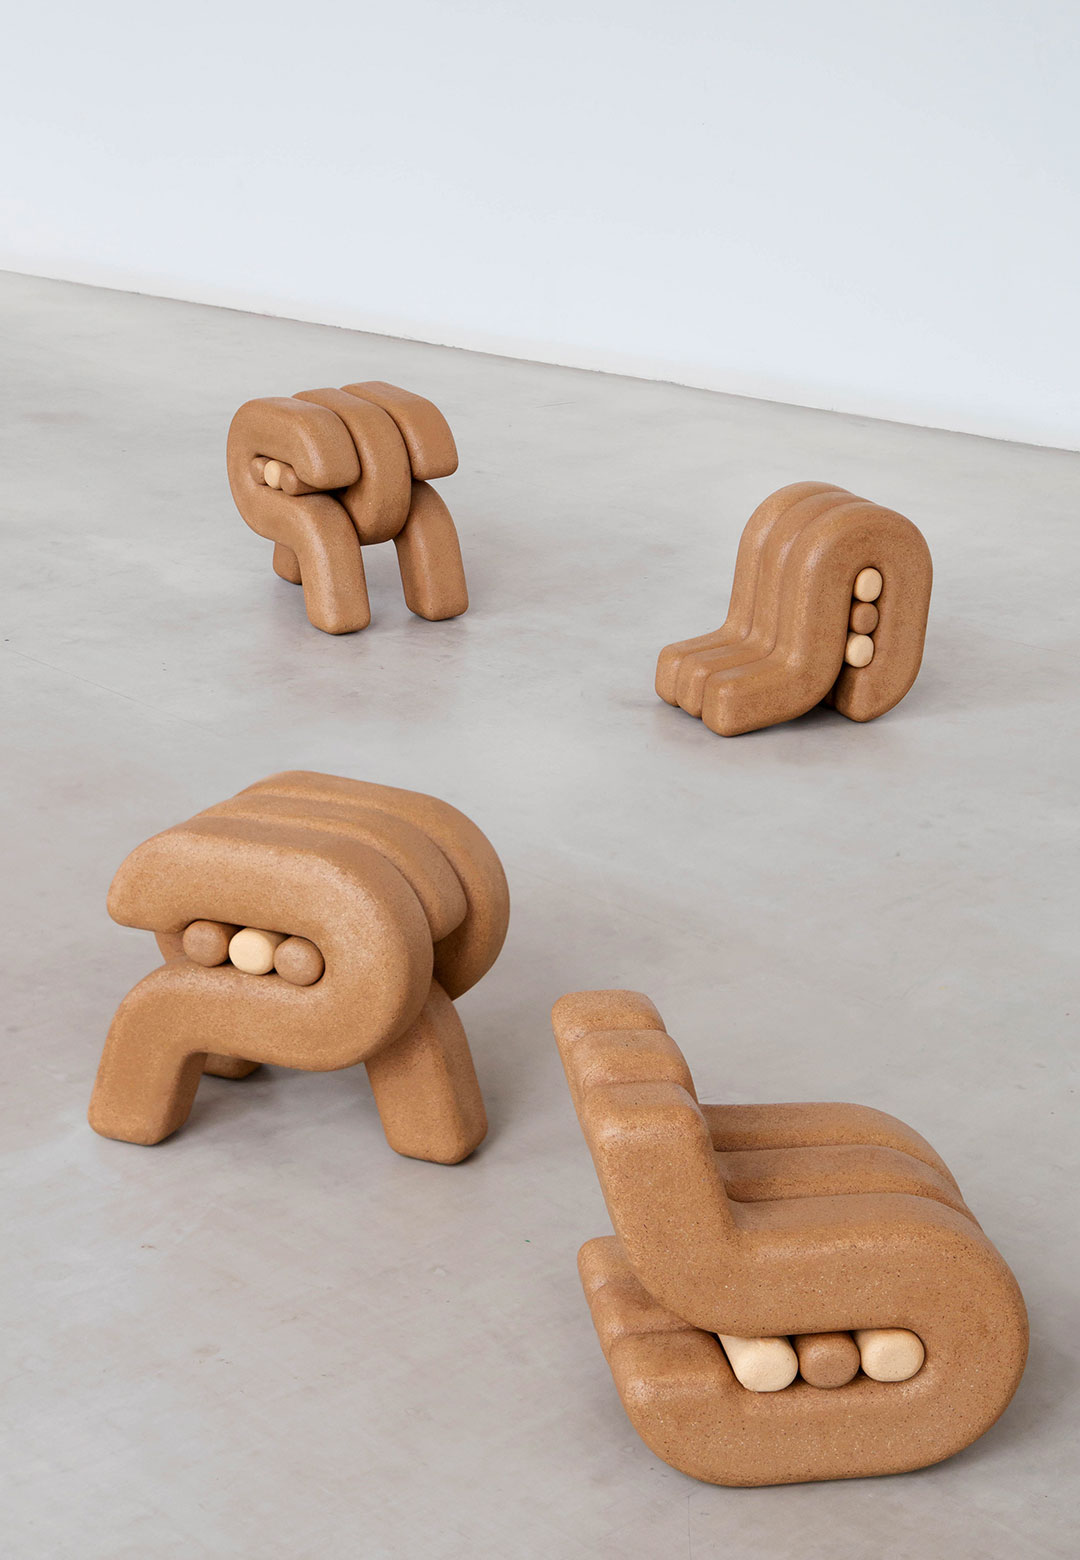 Eneris Collective unveil Nontalo Kids: a modular stool made of 7,500 olive pits